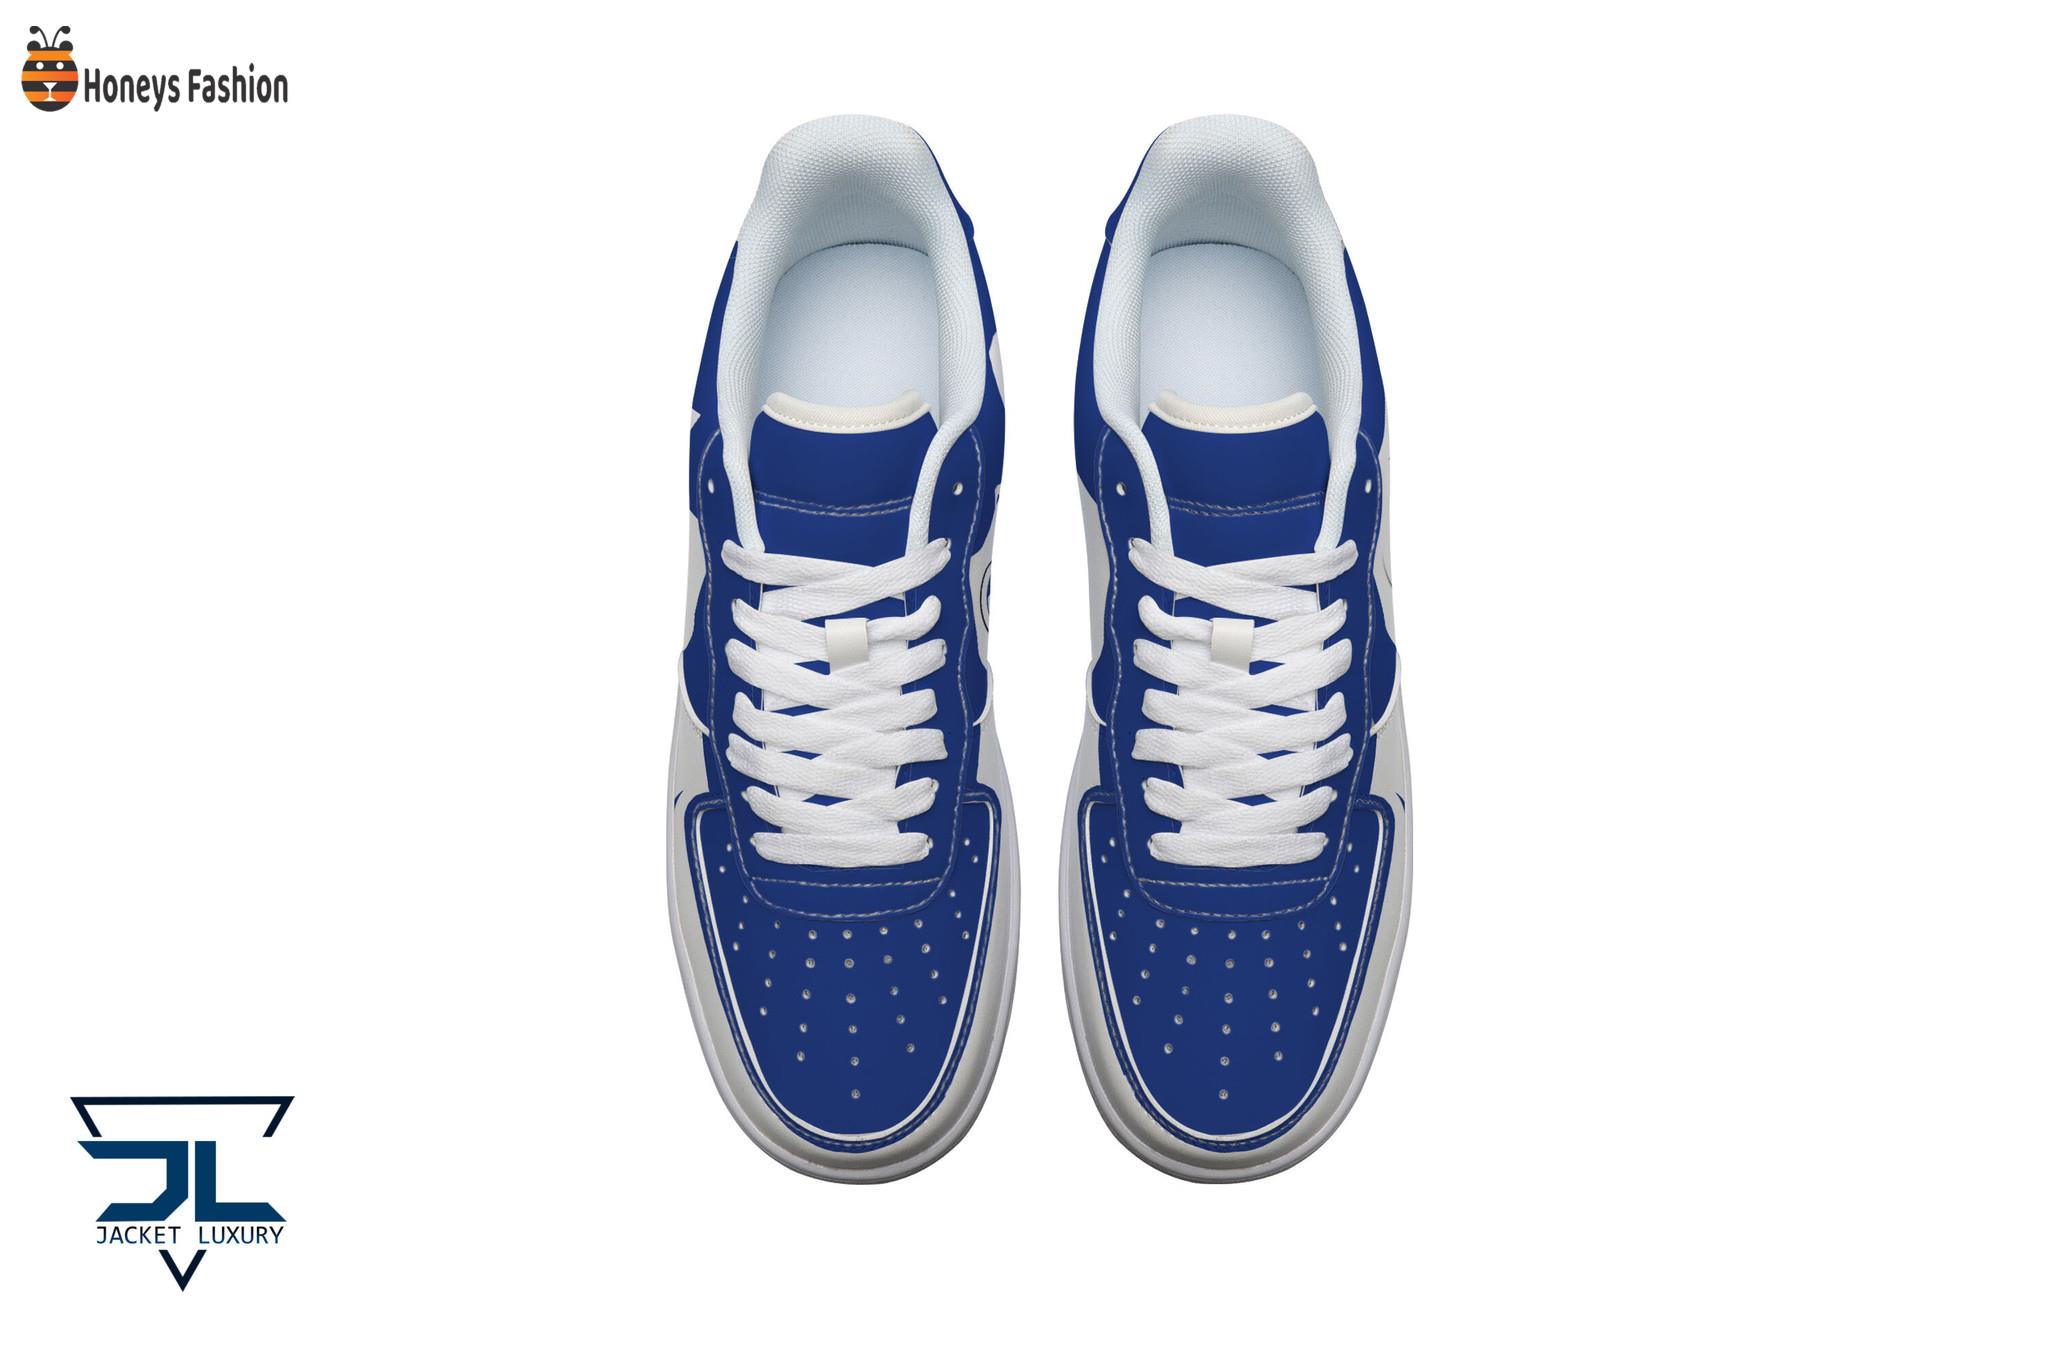 KAA Gent Air Force 1 Shoes Sneaker